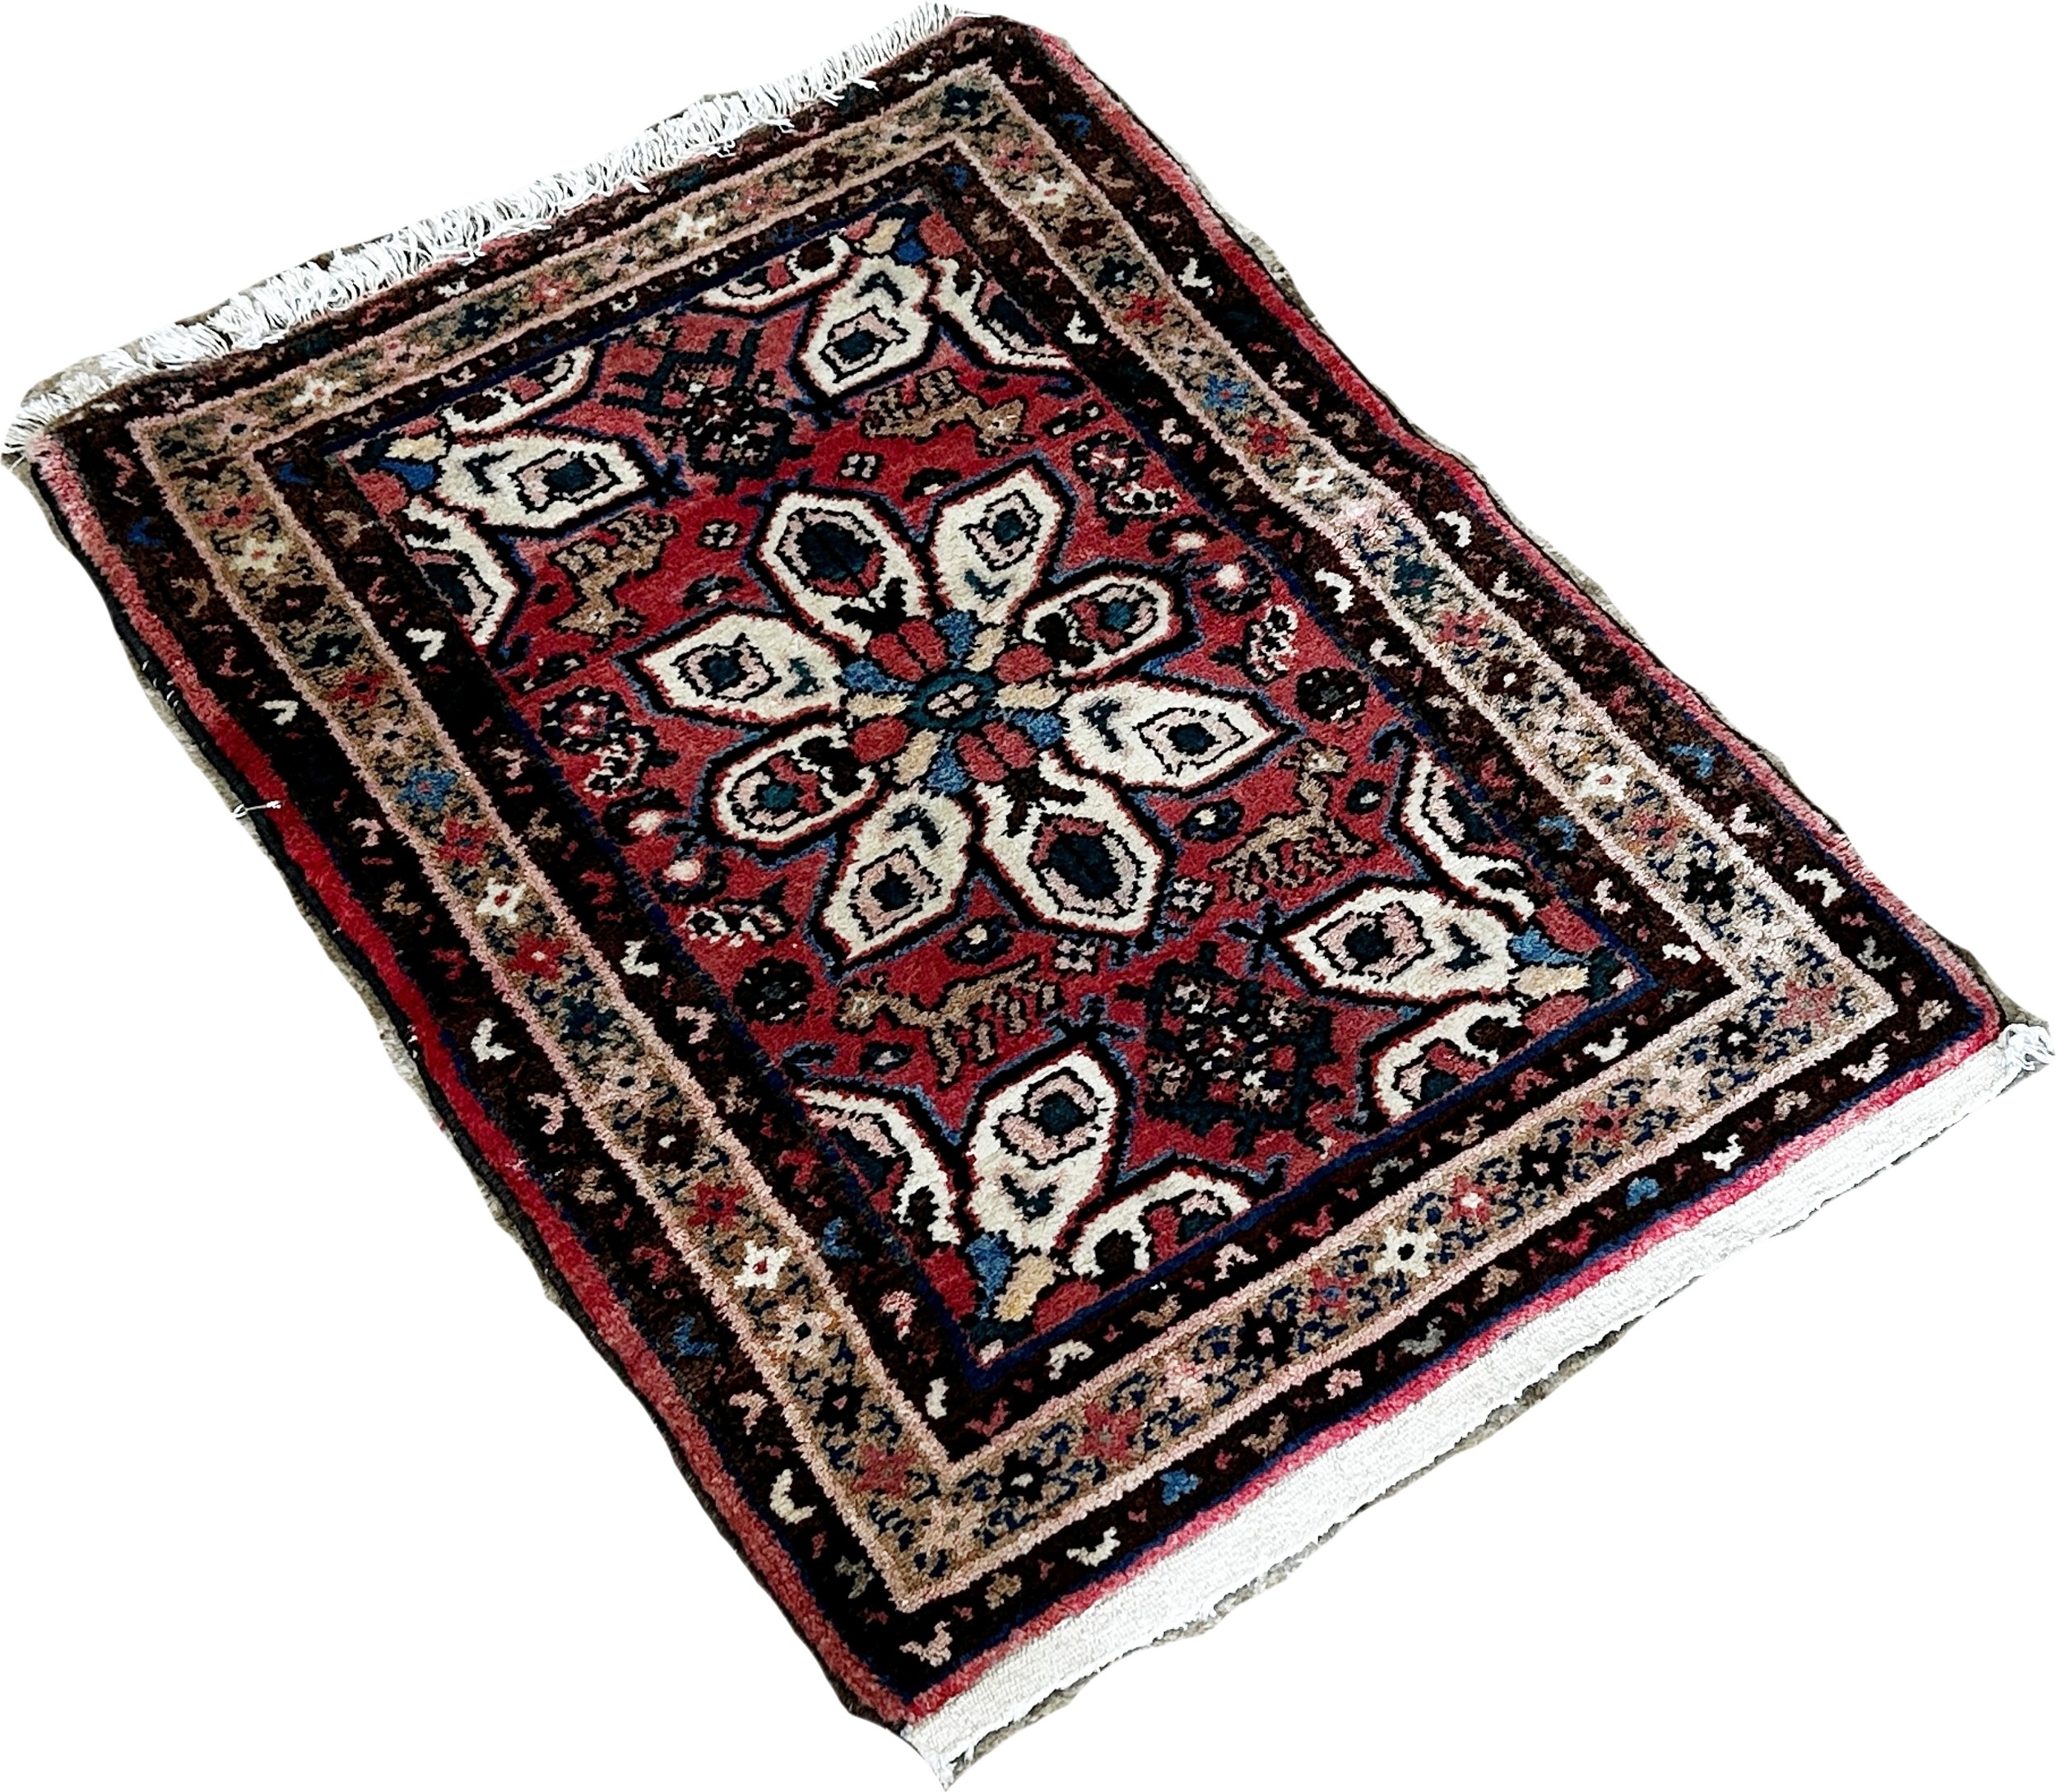 A small Iranian Hosseinabad rug with a central petal medallion 90cm x 63cm approximately - Image 2 of 3